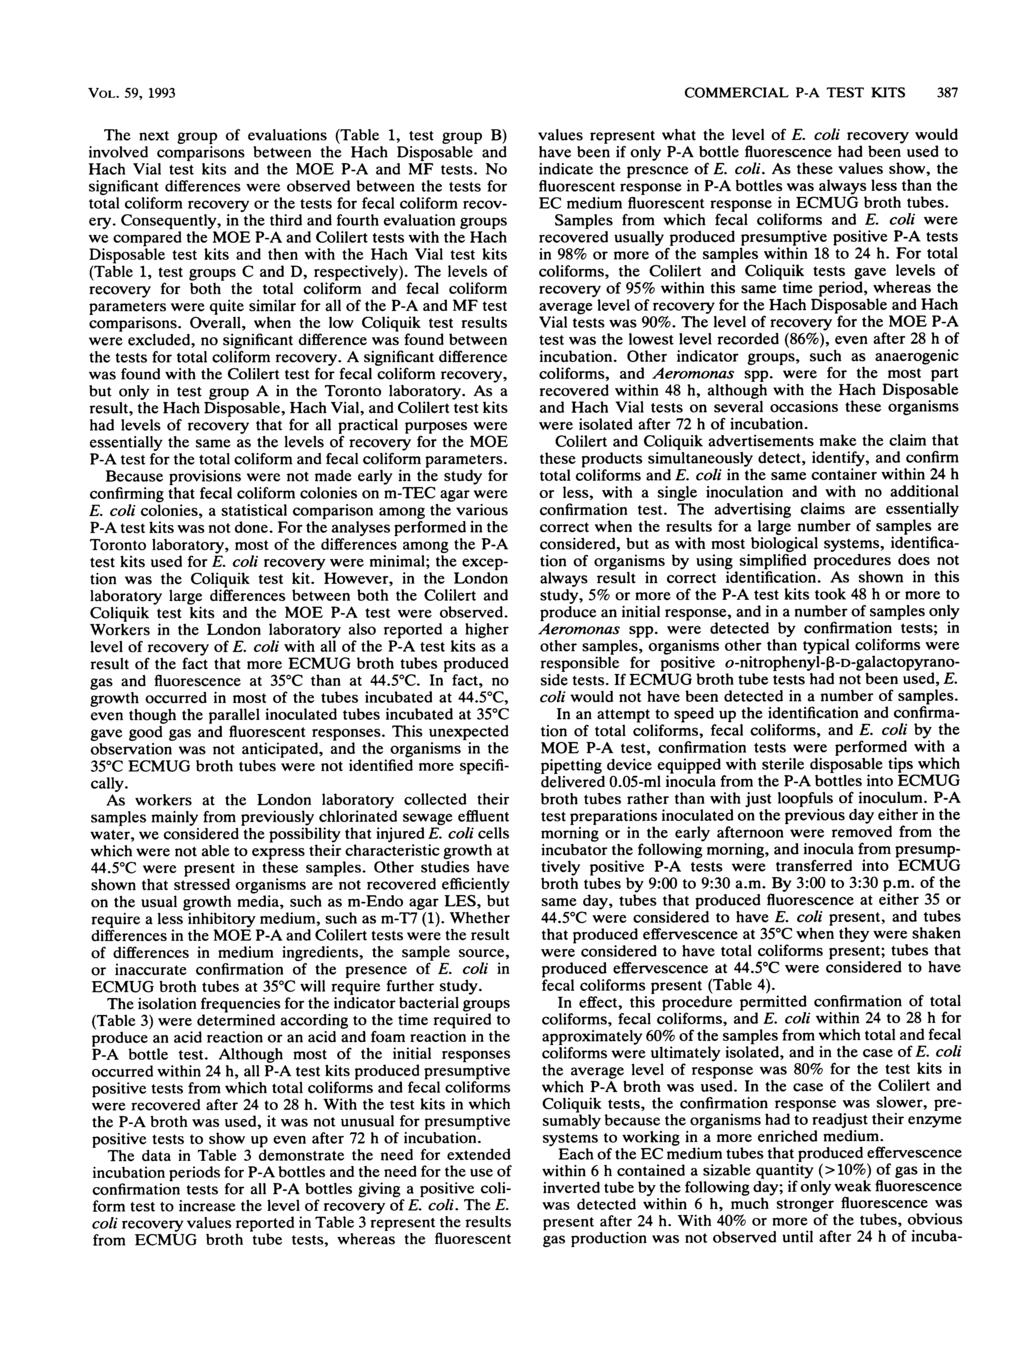 VOL. 59, 1993 The next group of evaluations (Table 1, test group B) involved comparisons between the Hach Disposable and Hach Vial test kits and the MOE and MF tests.